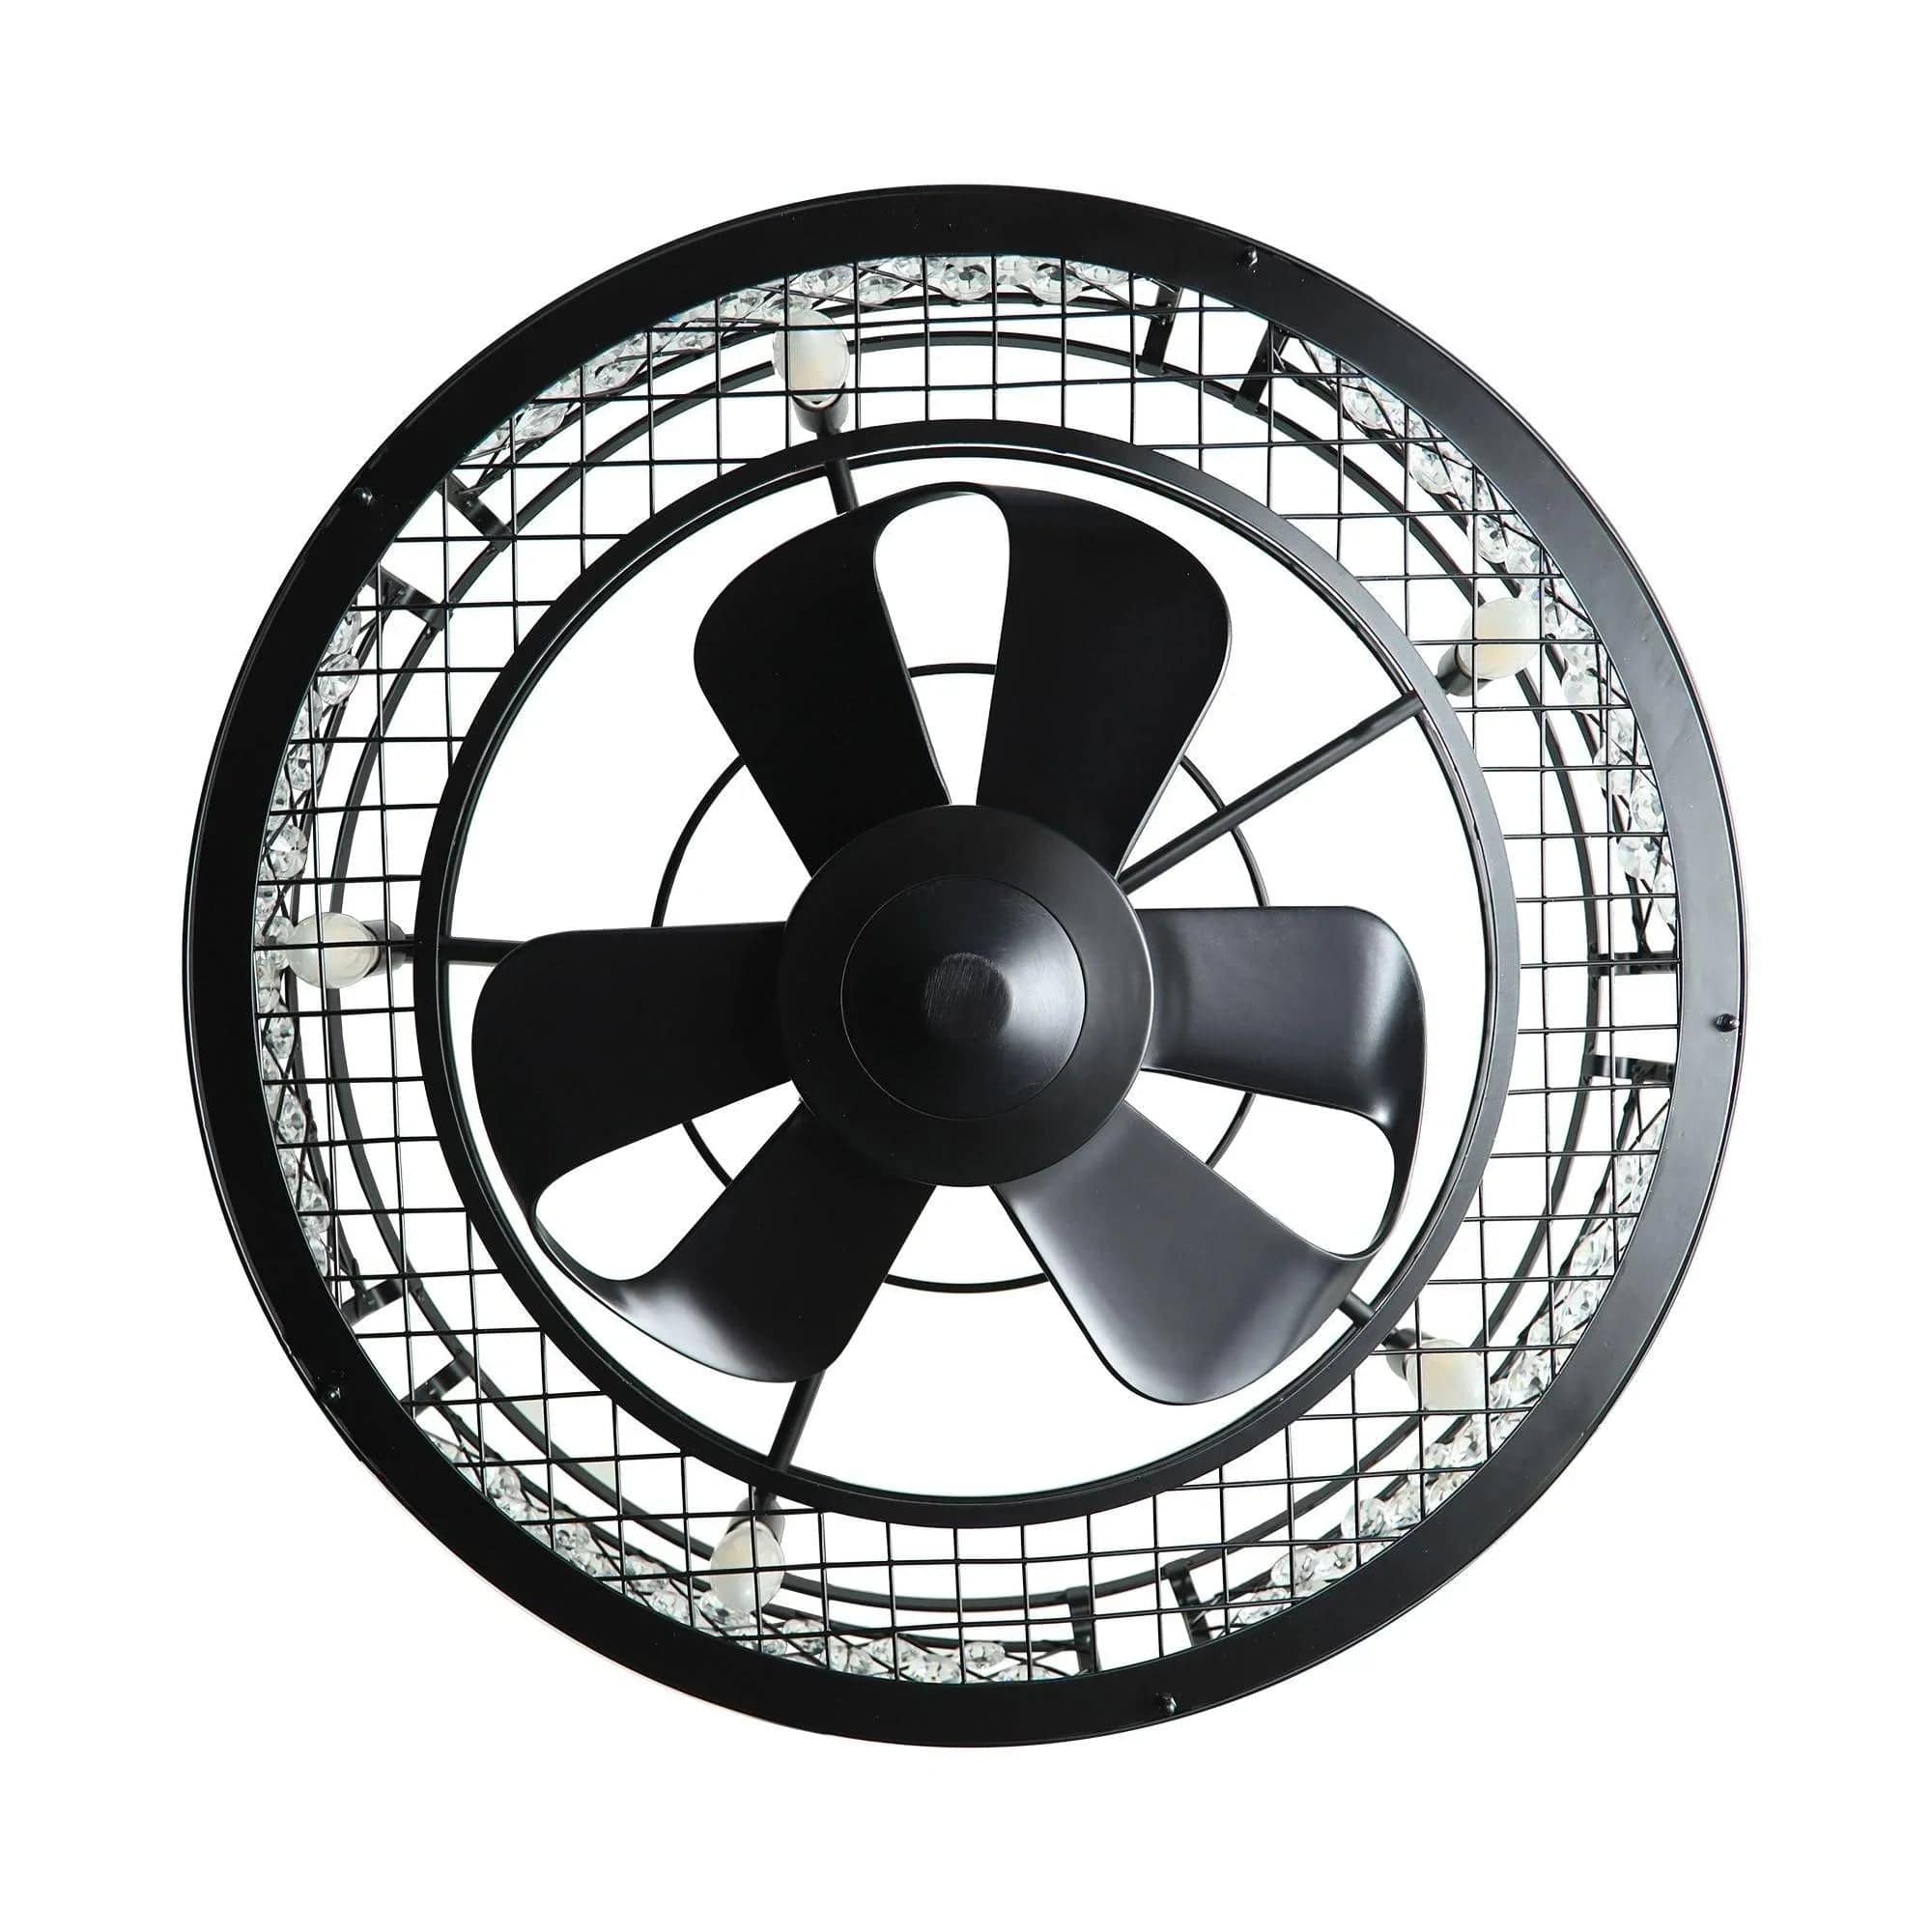 Parrot Uncle Parrot Uncle 27 In. Wright Industrial Crystal Ceiling Fan with Lighting in Black Ceiling Fan F8215110V